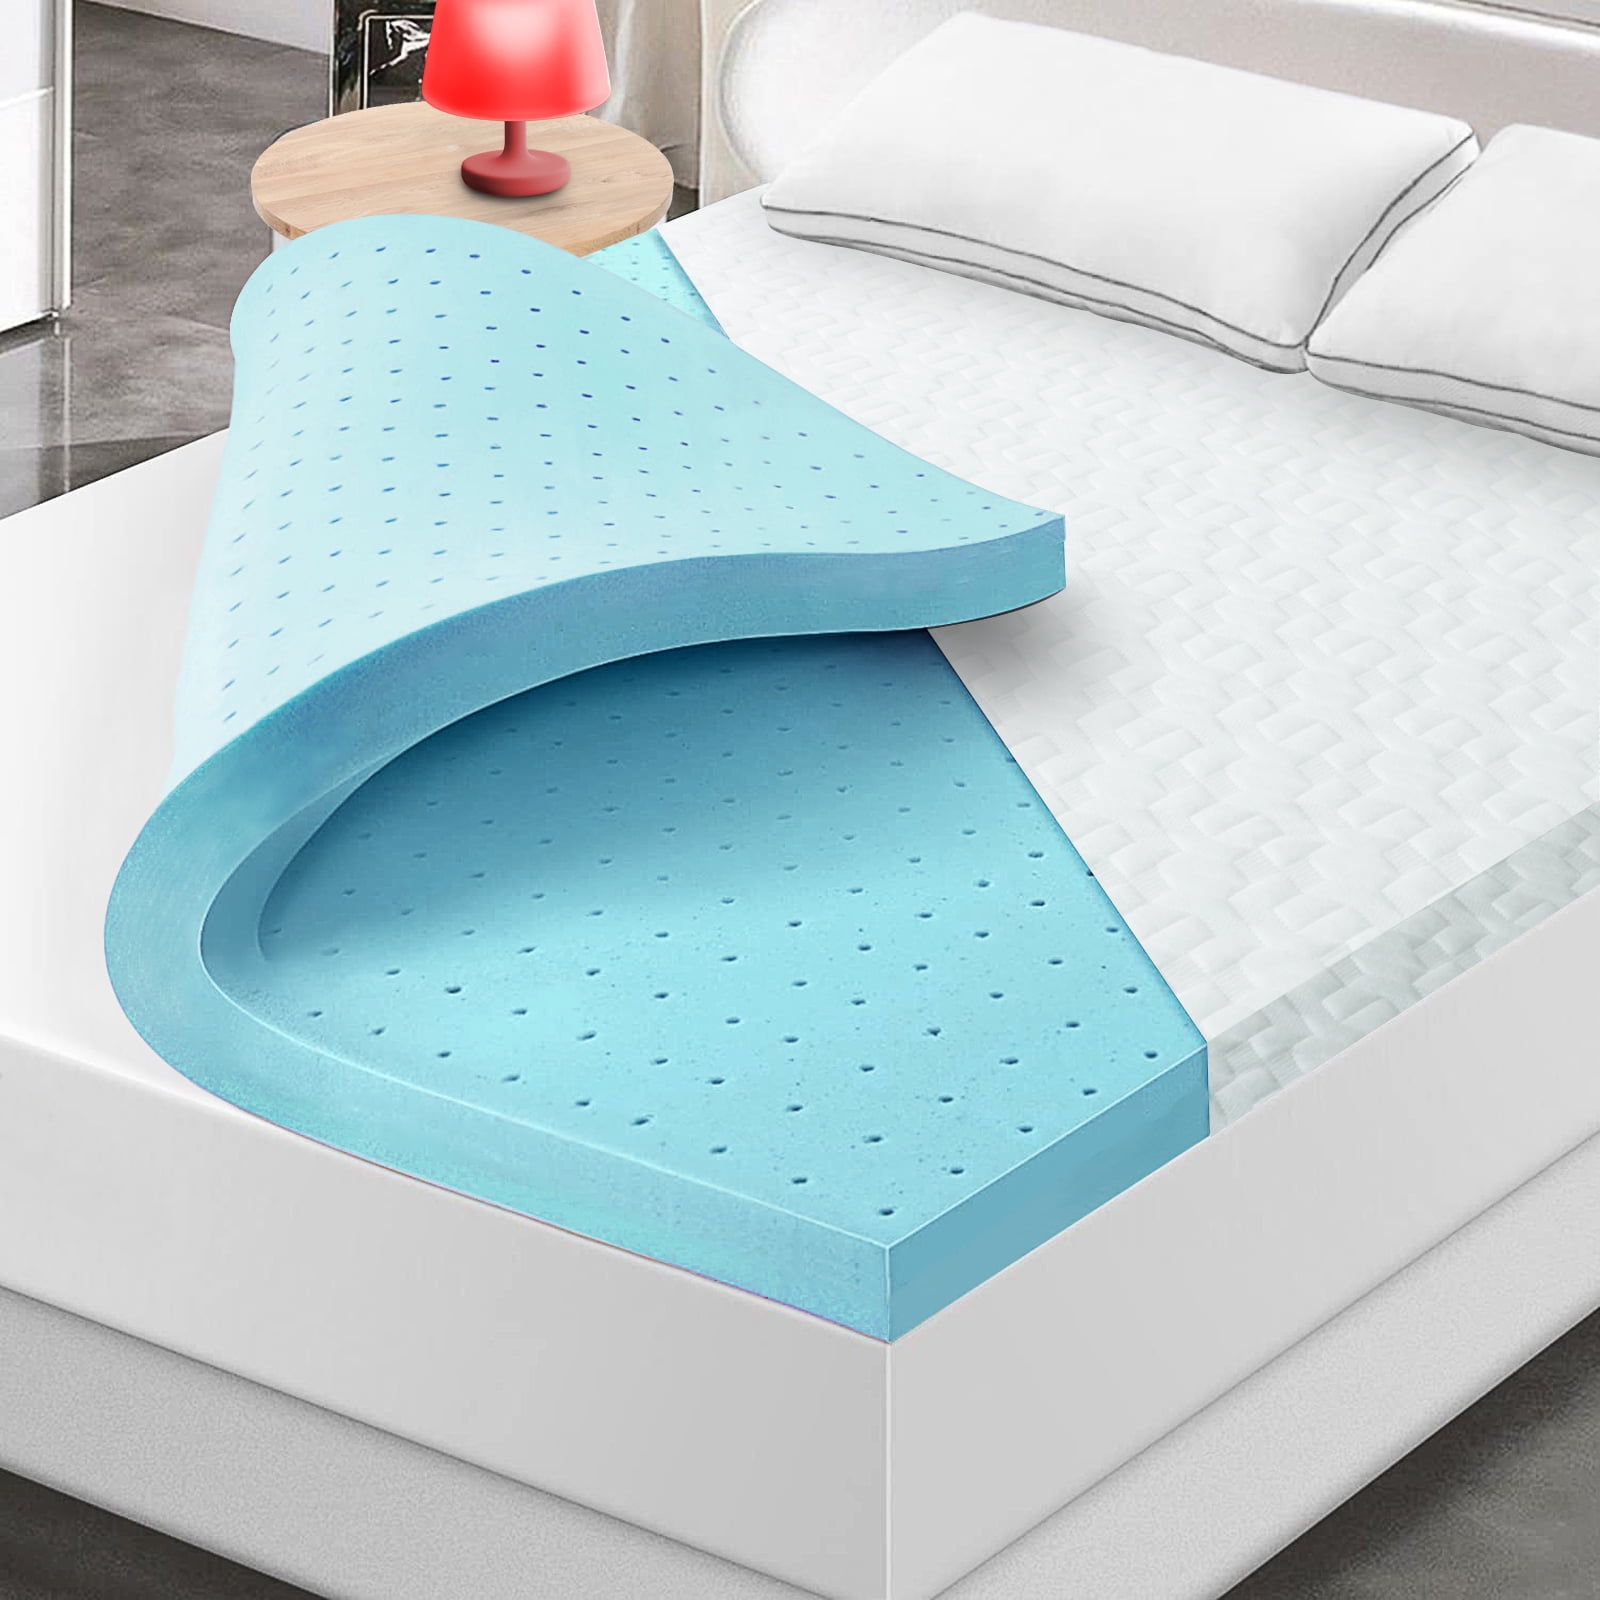 Details about   Gel Memory Foam Topper Mattress Bed Pad Cooling Pressure Relief Hypoallergenic 